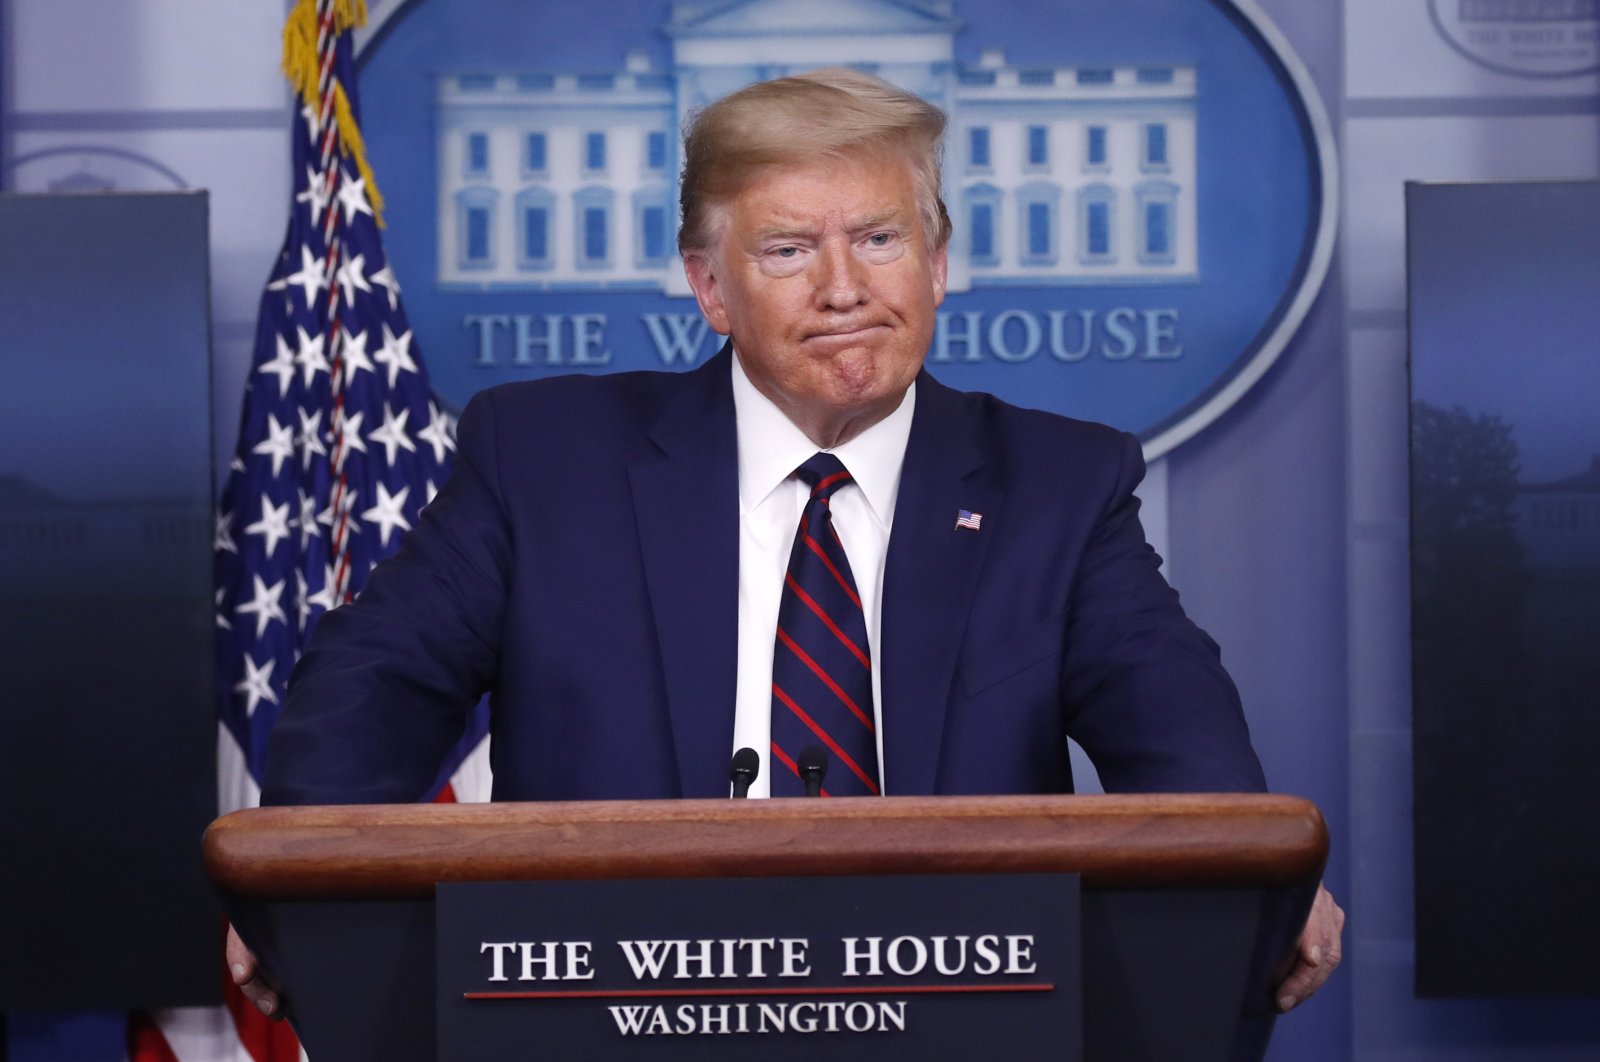 President Donald Trump pauses as he speaks about the coronavirus in the James Brady Press Briefing Room of the White House, Washington D.C., Thursday, April 2, 2020. (AP Photo)